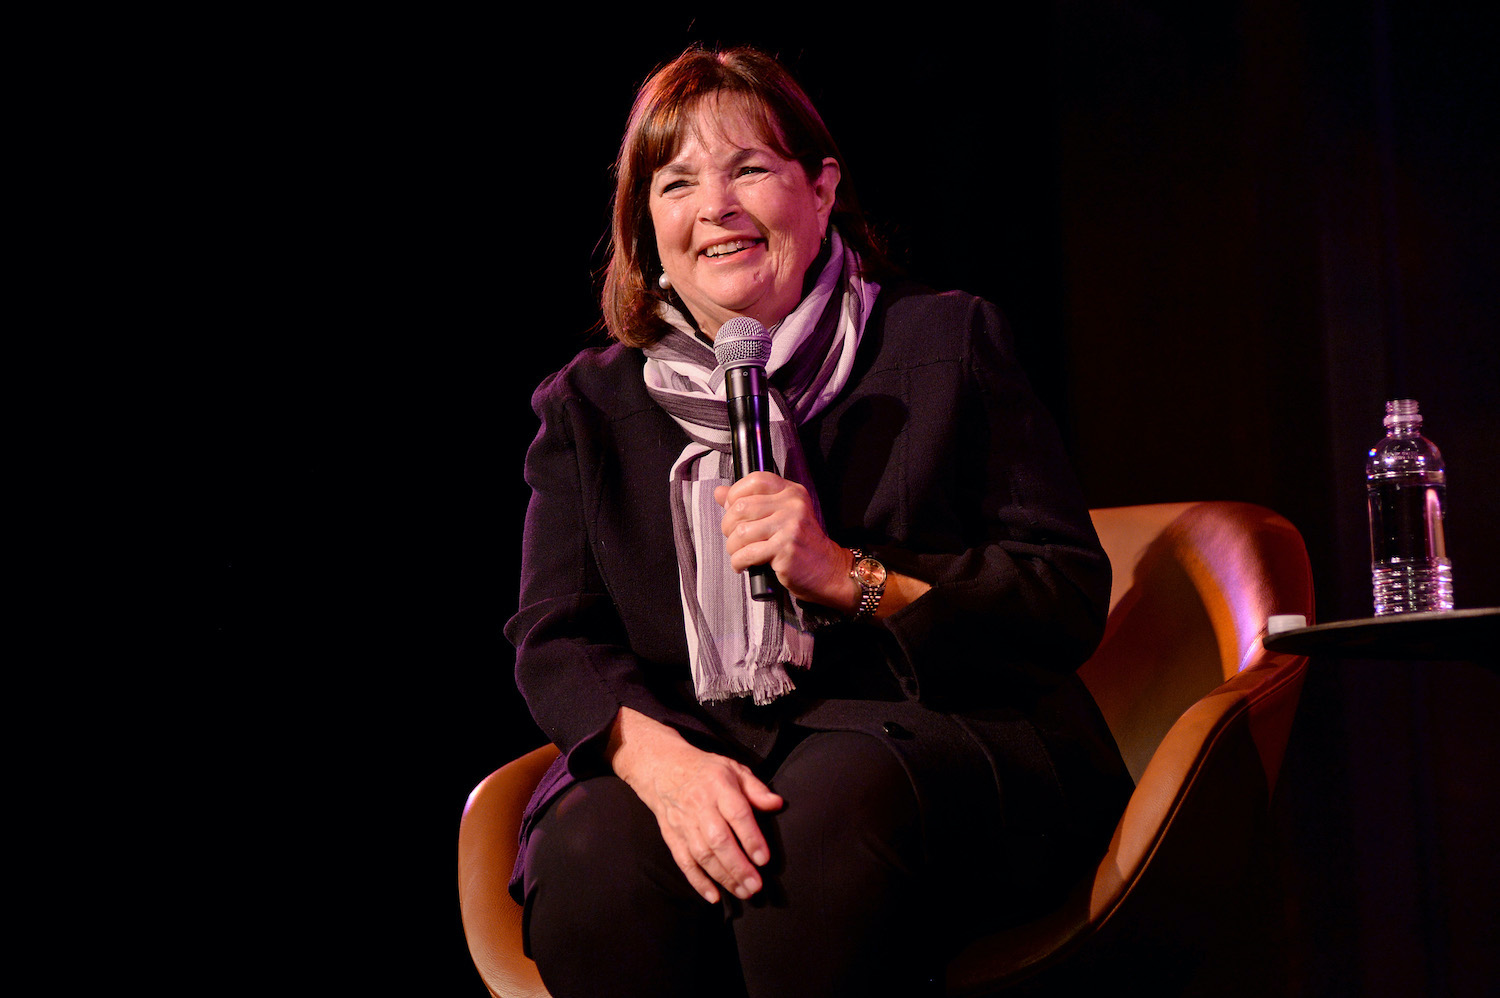 Ina Garten speaks on stage during a talk with Helen Rosner at 2019 New Yorker Festival